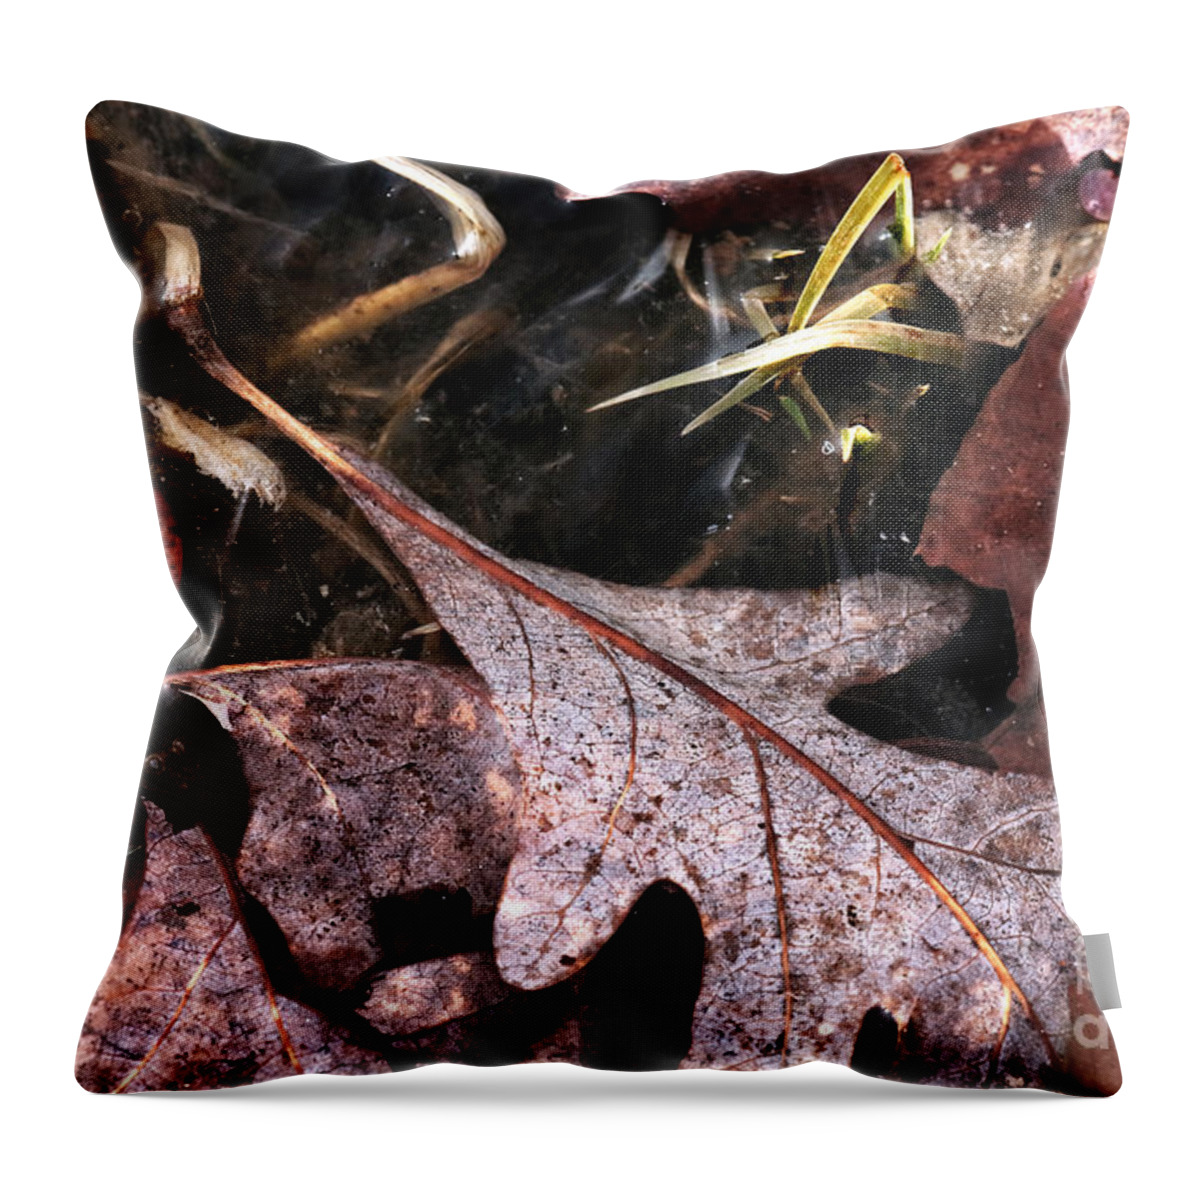 Fallen Leaves Throw Pillow featuring the photograph Fallen Leaves by John Rizzuto